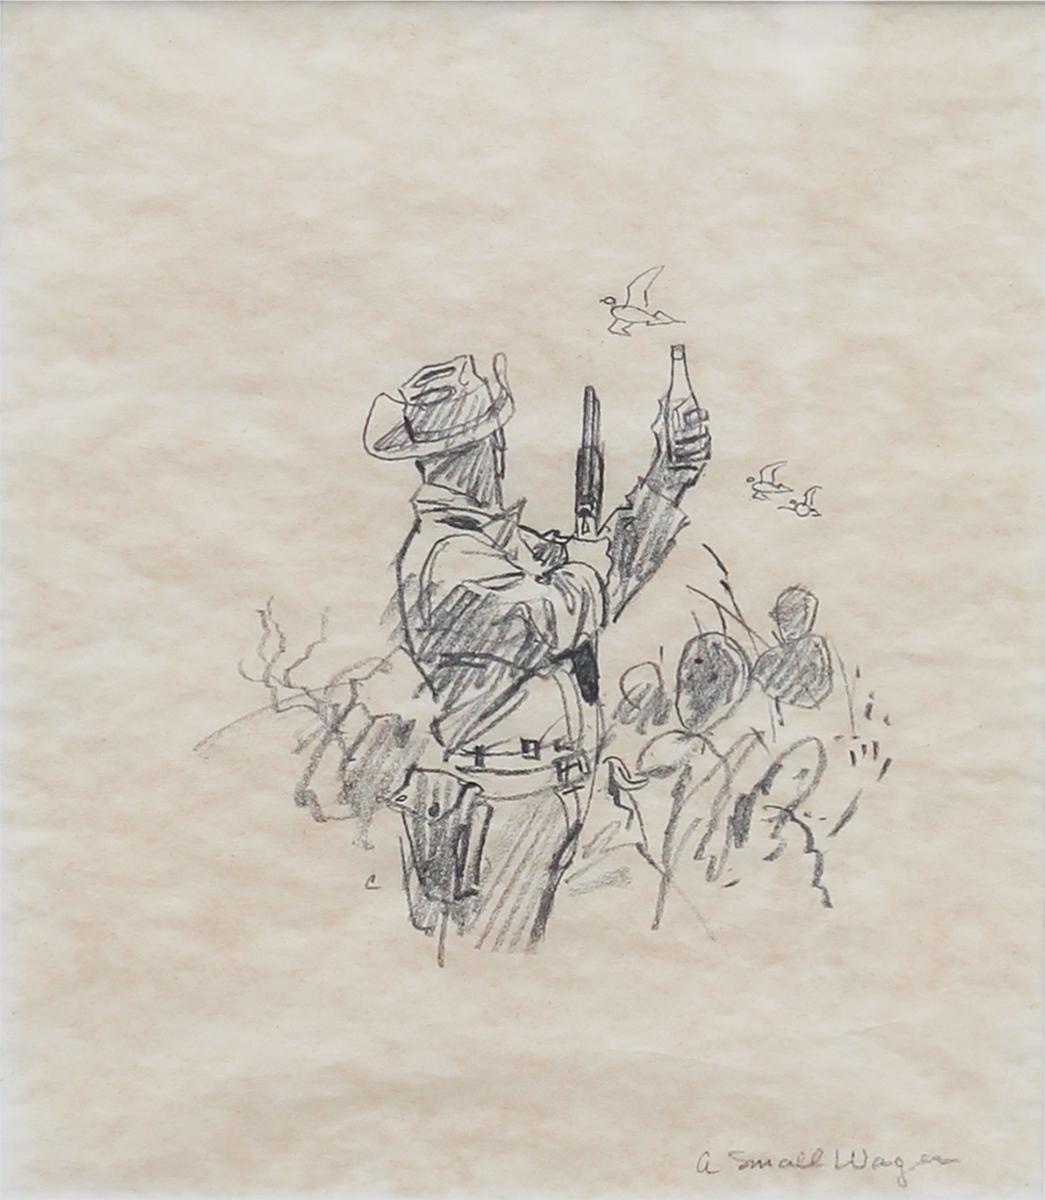 Realistic drawing of a man in a combat by Texas artist, John P. Cowan. Unsigned. Titled in the lower right corner of the image. Framed and matted in a pewter-colored wooden frame.

Dimensions With Frame: H .25 in. x W 6.25 in.

Artist Biography: